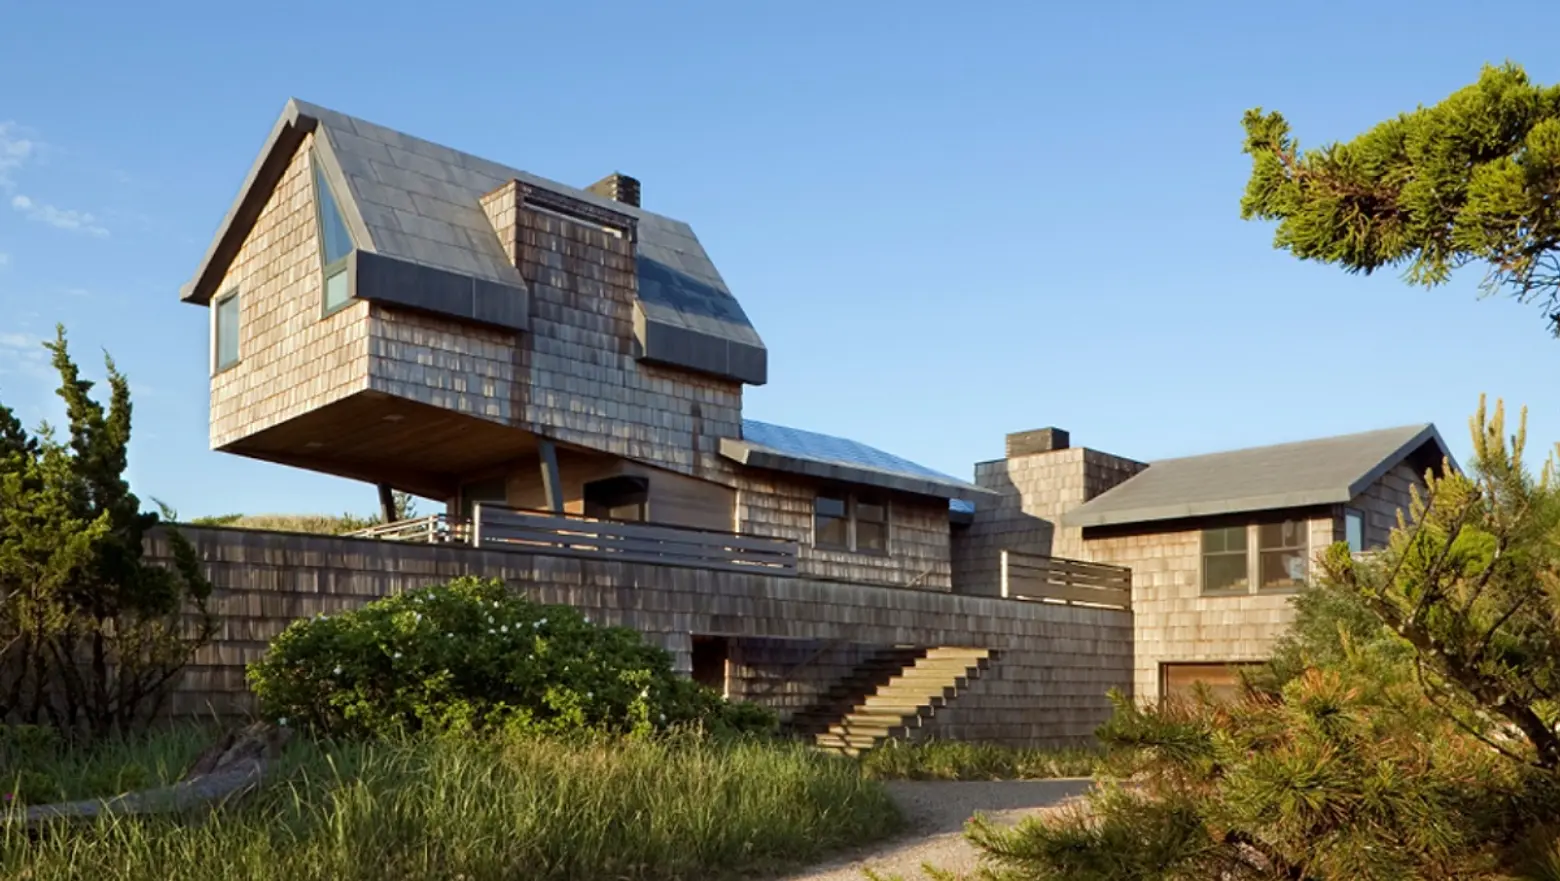 Whaler’s Lane Residence by Rogers Marvel Architects is a Beacon on the Amagansett Shores